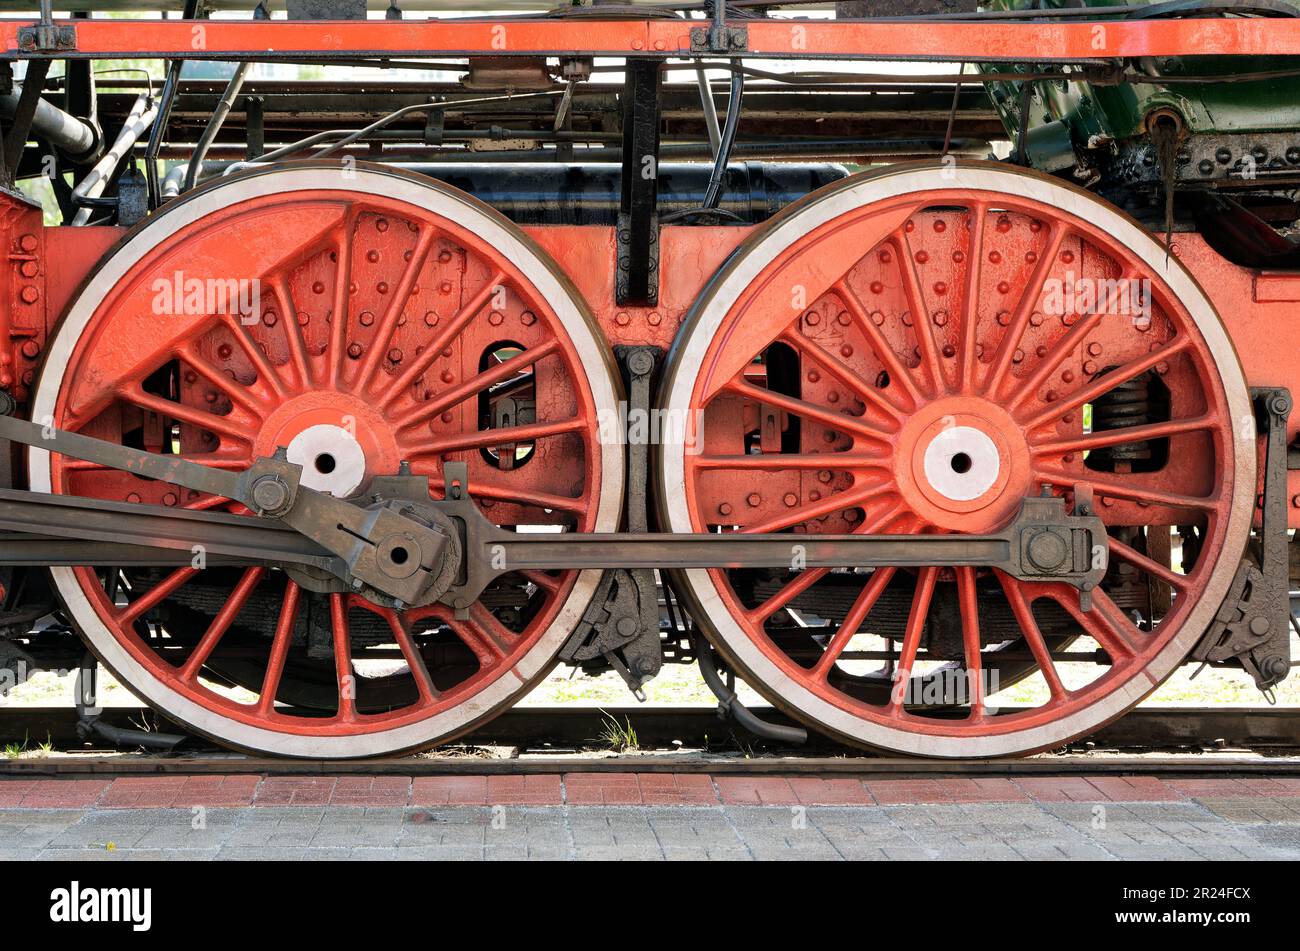 Big red wheels, flywheels, connecting rods and other machinery of an old steam locomotive. Stock Photo